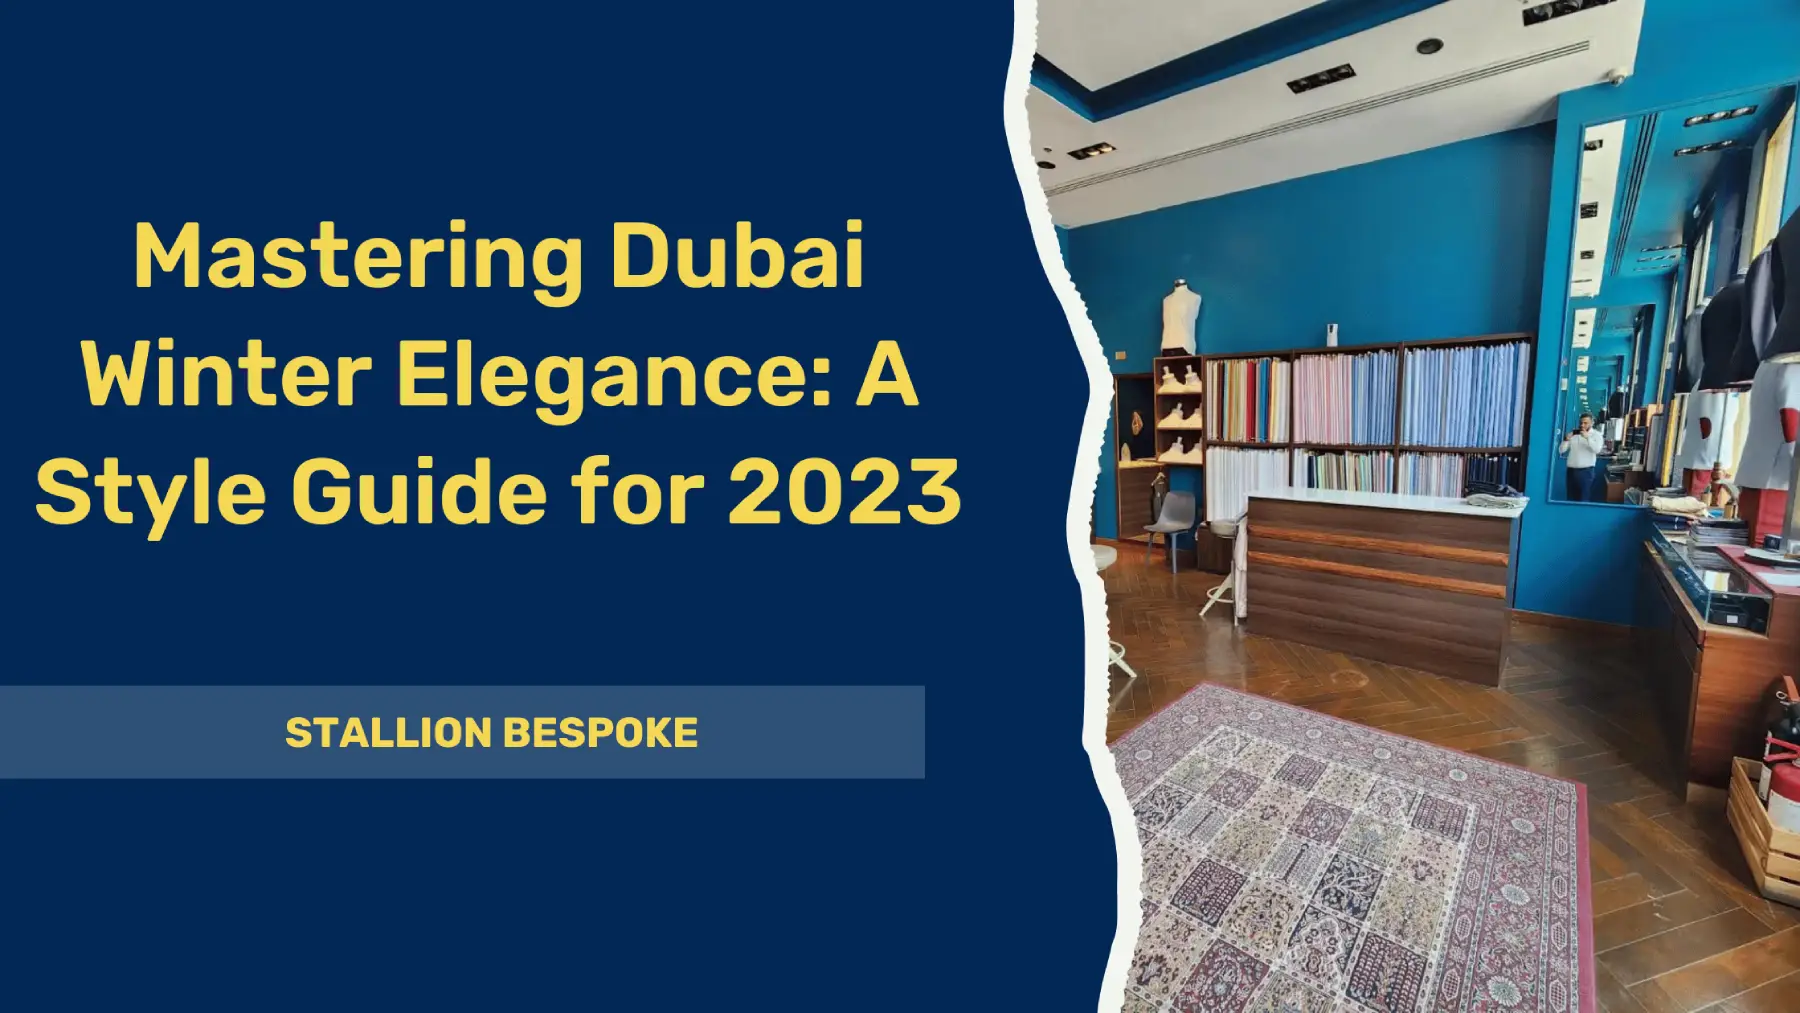 You are currently viewing Mastering Dubai Winter Elegance: A Style Guide for 2023